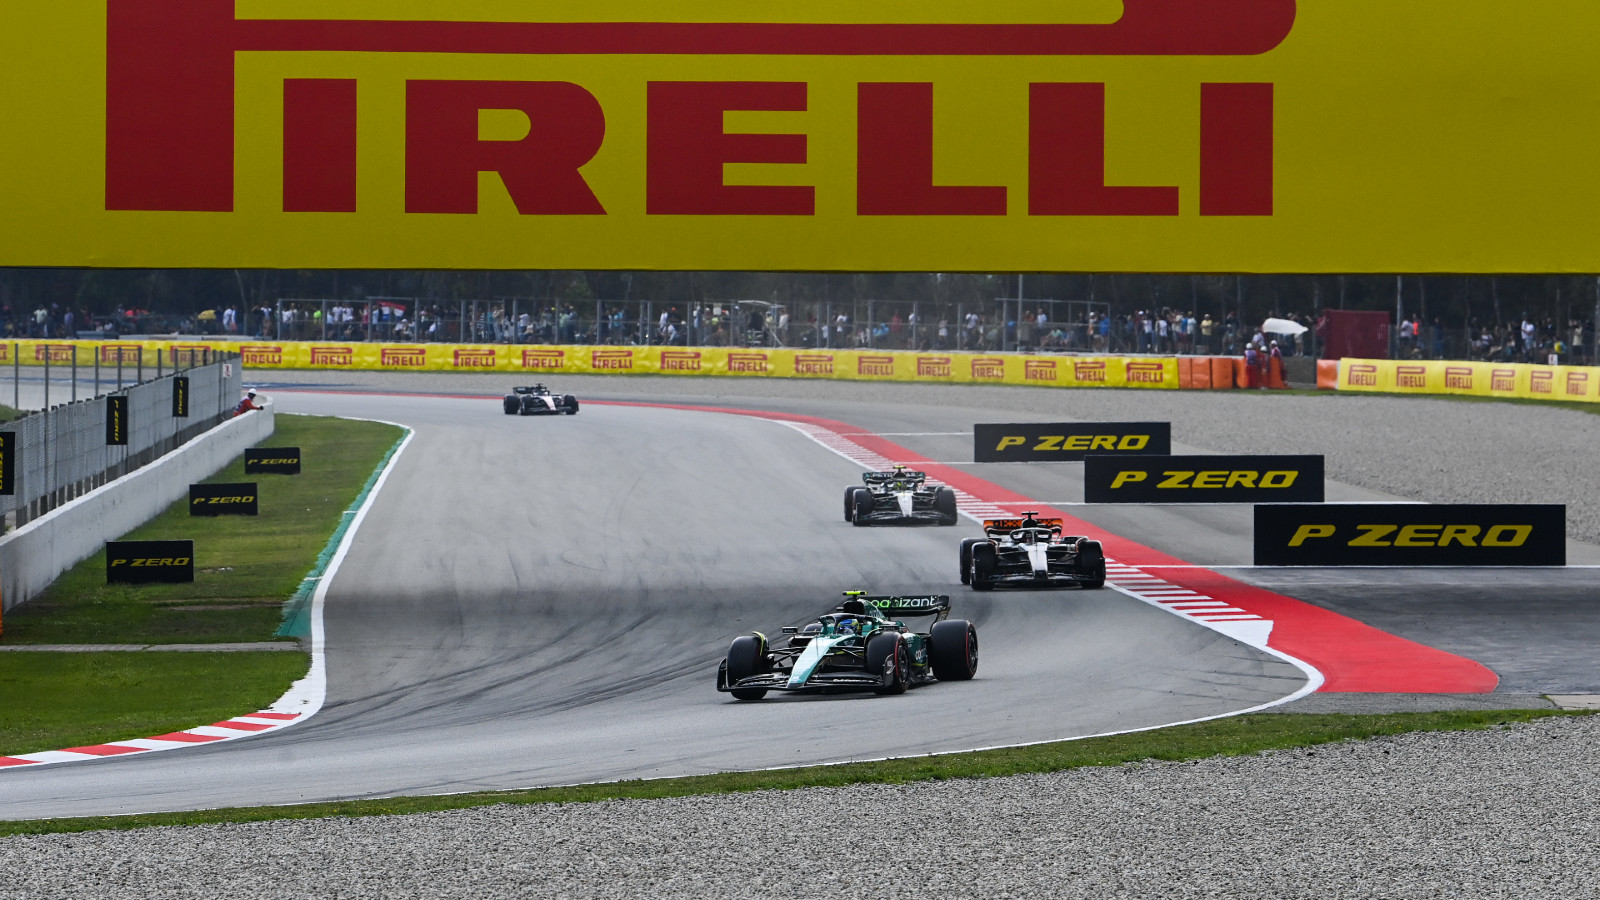 Martin Brundle dismisses boring race critics with Barcelona track now energised PlanetF1